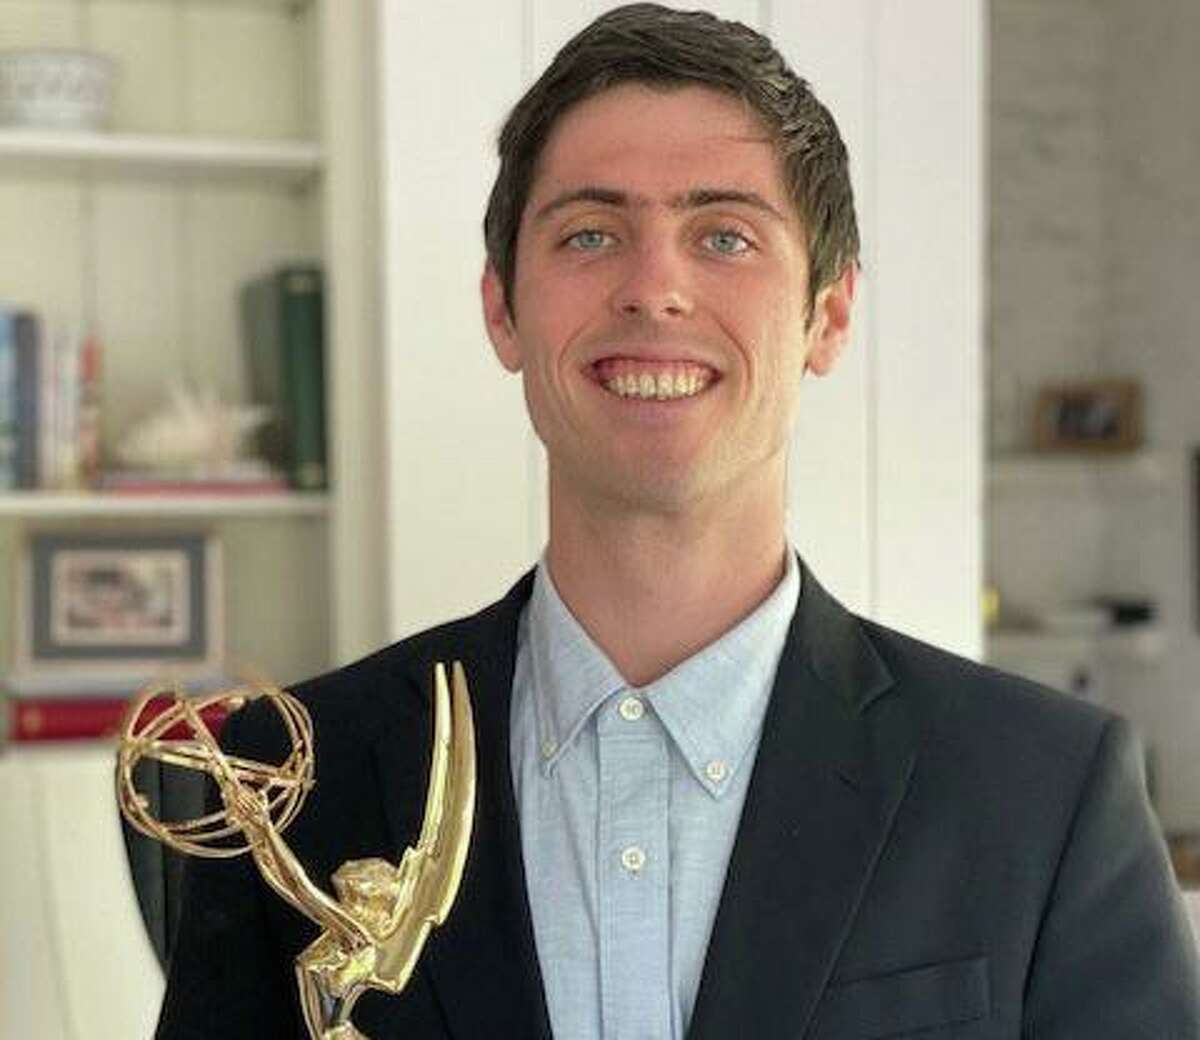 Greenwich resident Chris Lucey, a member of the Class of 2015 at Brunswick, recently won a Sports Emmy Award for his work on the MLB Network.